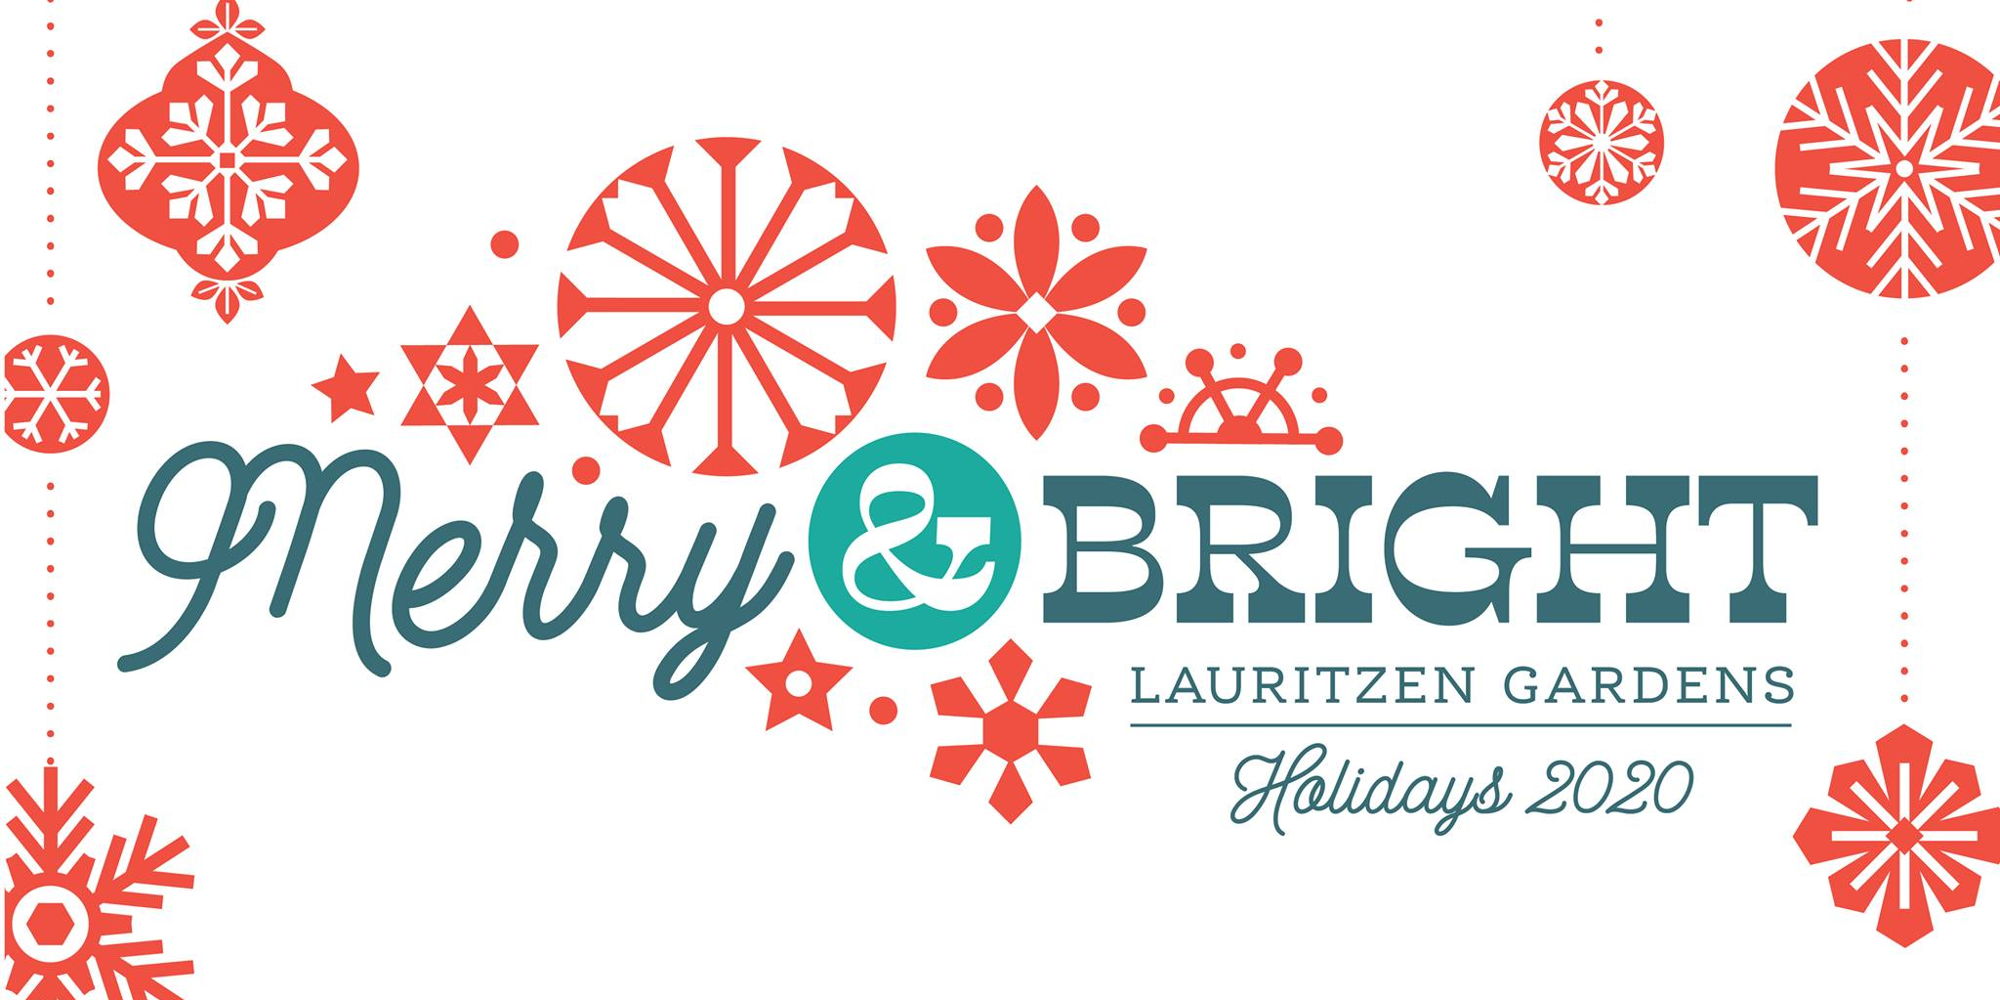 Merry & Bright promotional image